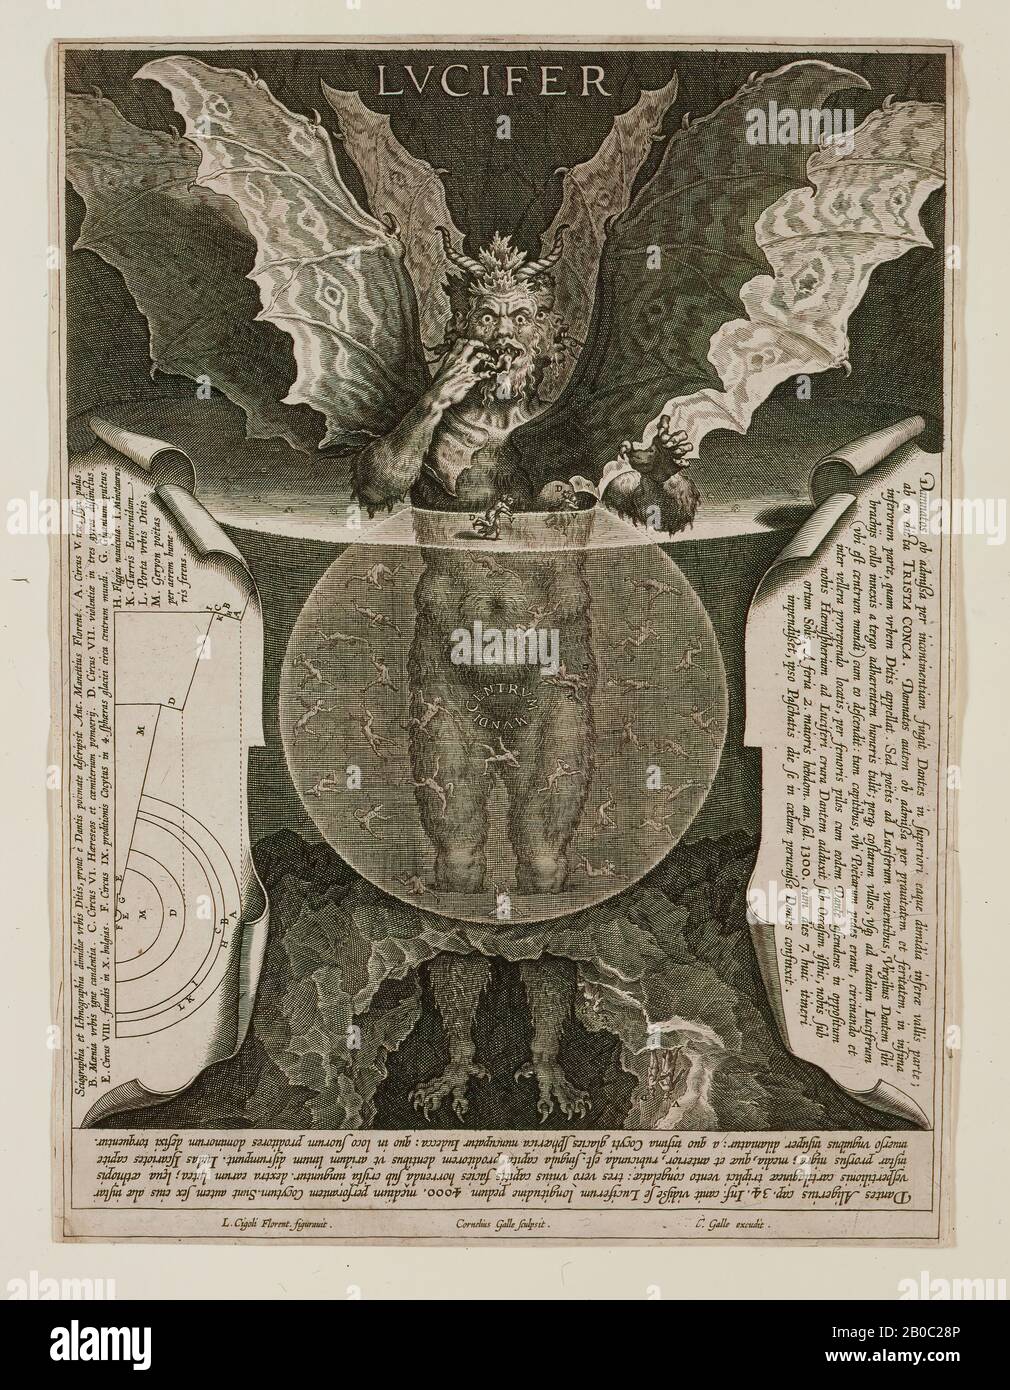 Cornelis Galle, Lucifer, n.d., engraving on paper, 10 7/8 in. x 8 1/16 in. (27.6 cm. x 20.4 cm.) Stock Photo